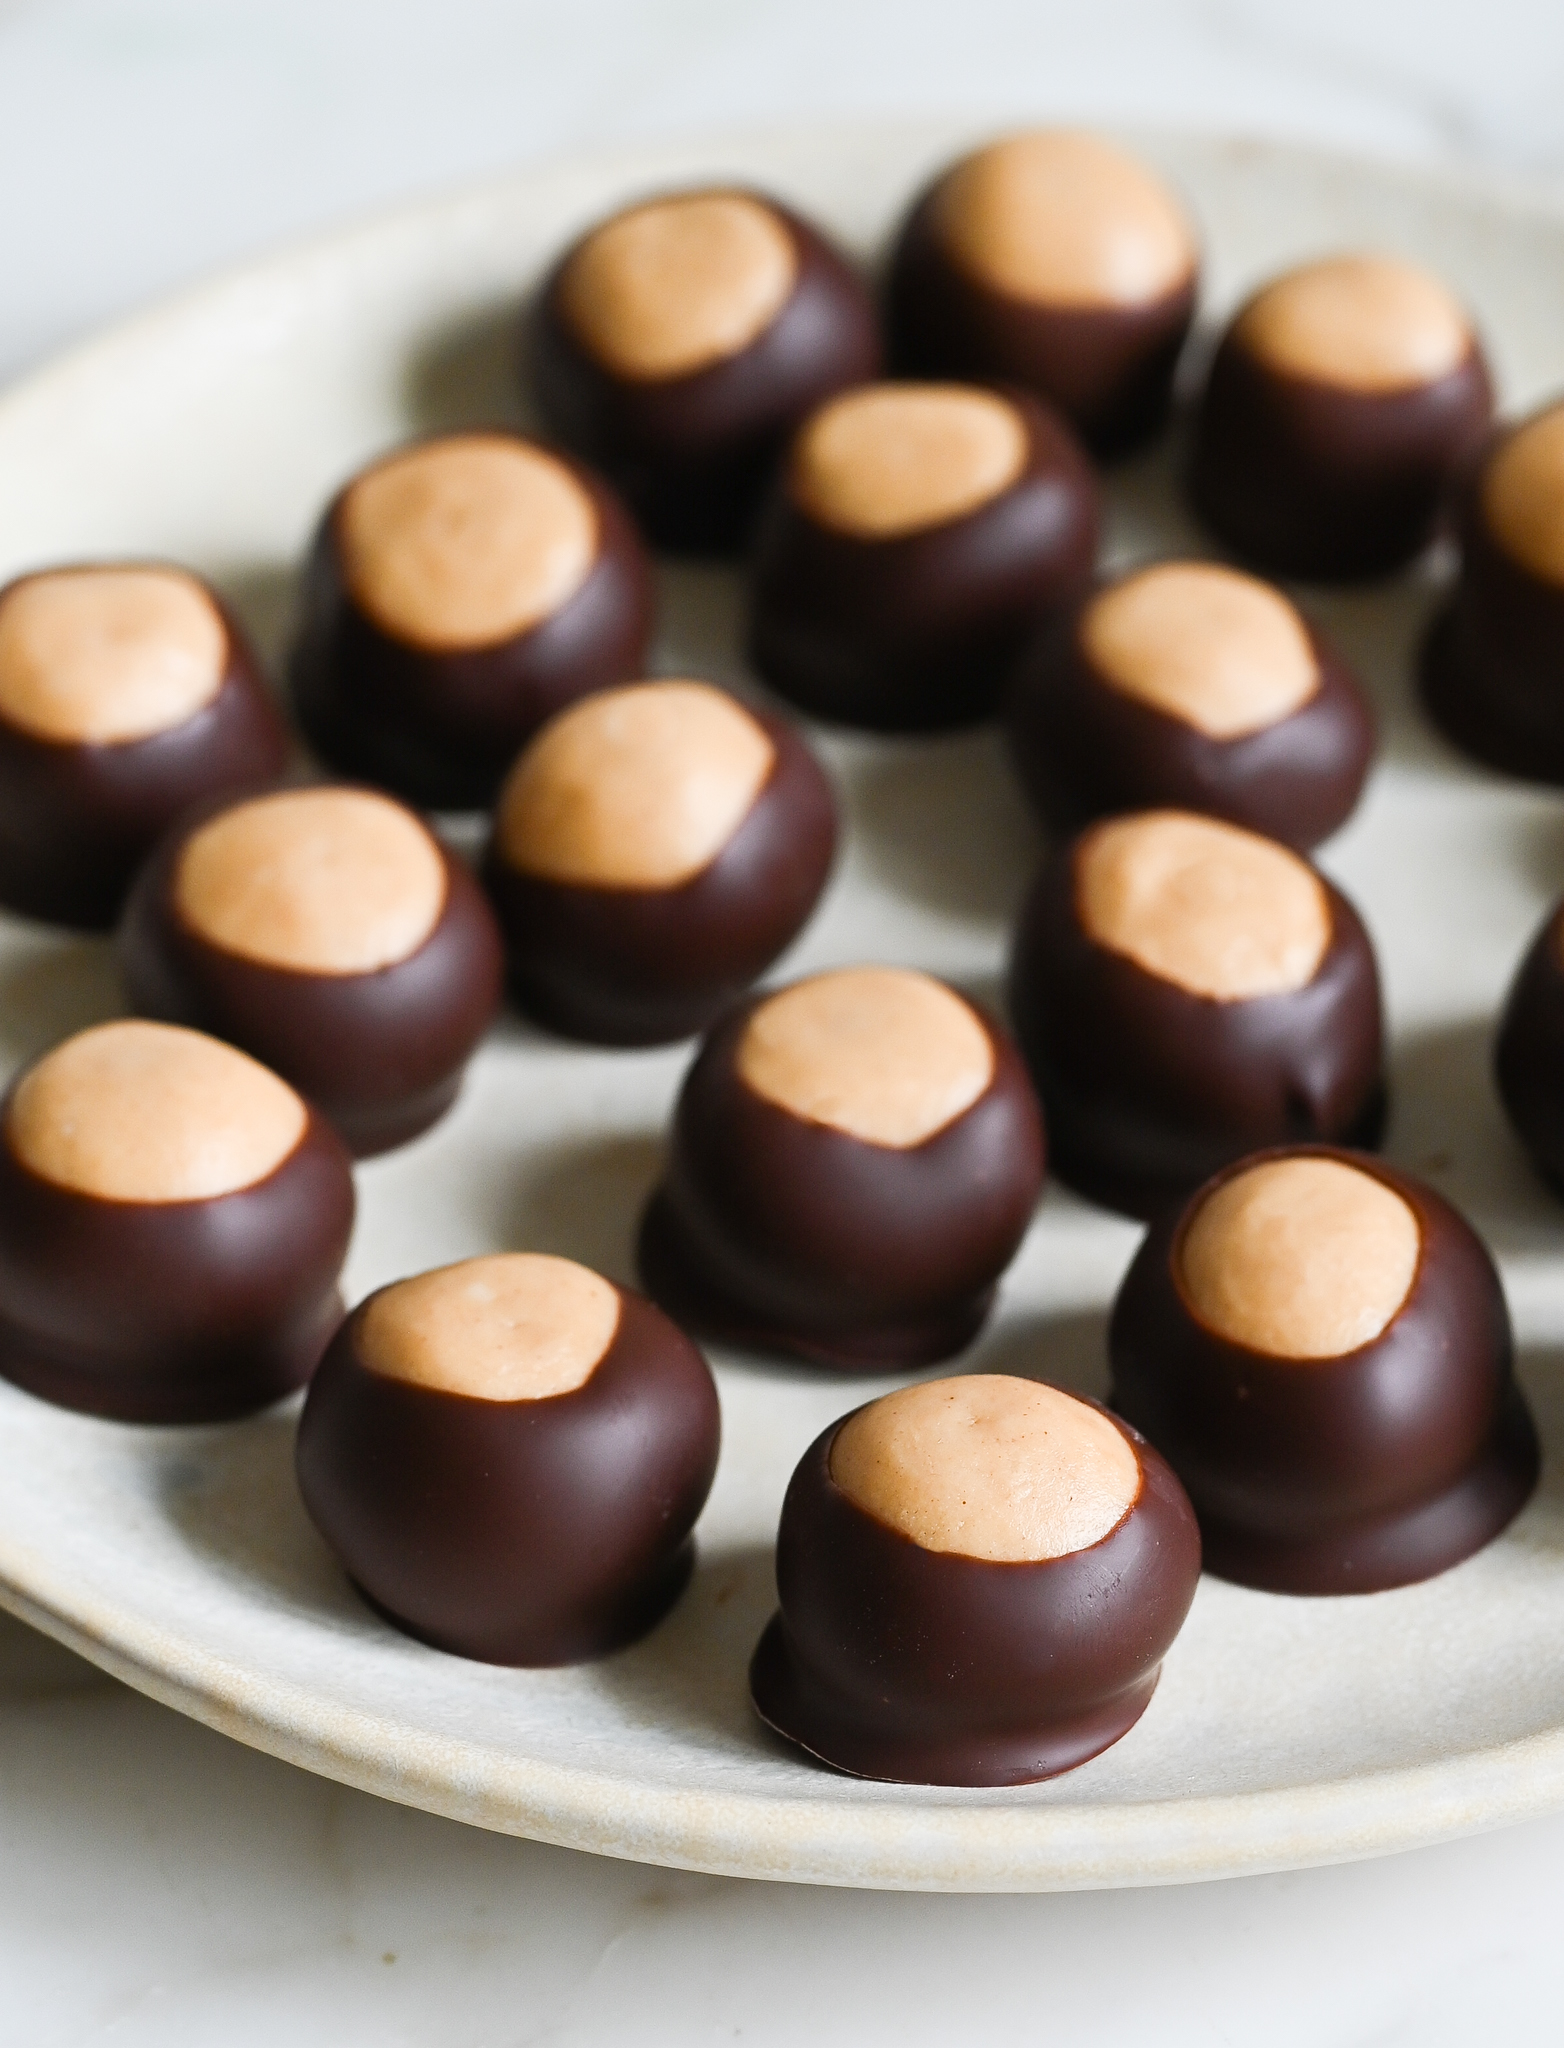 Sweet Food, Three Round Chocolate Candy Balls Or Chocolate Bonbons